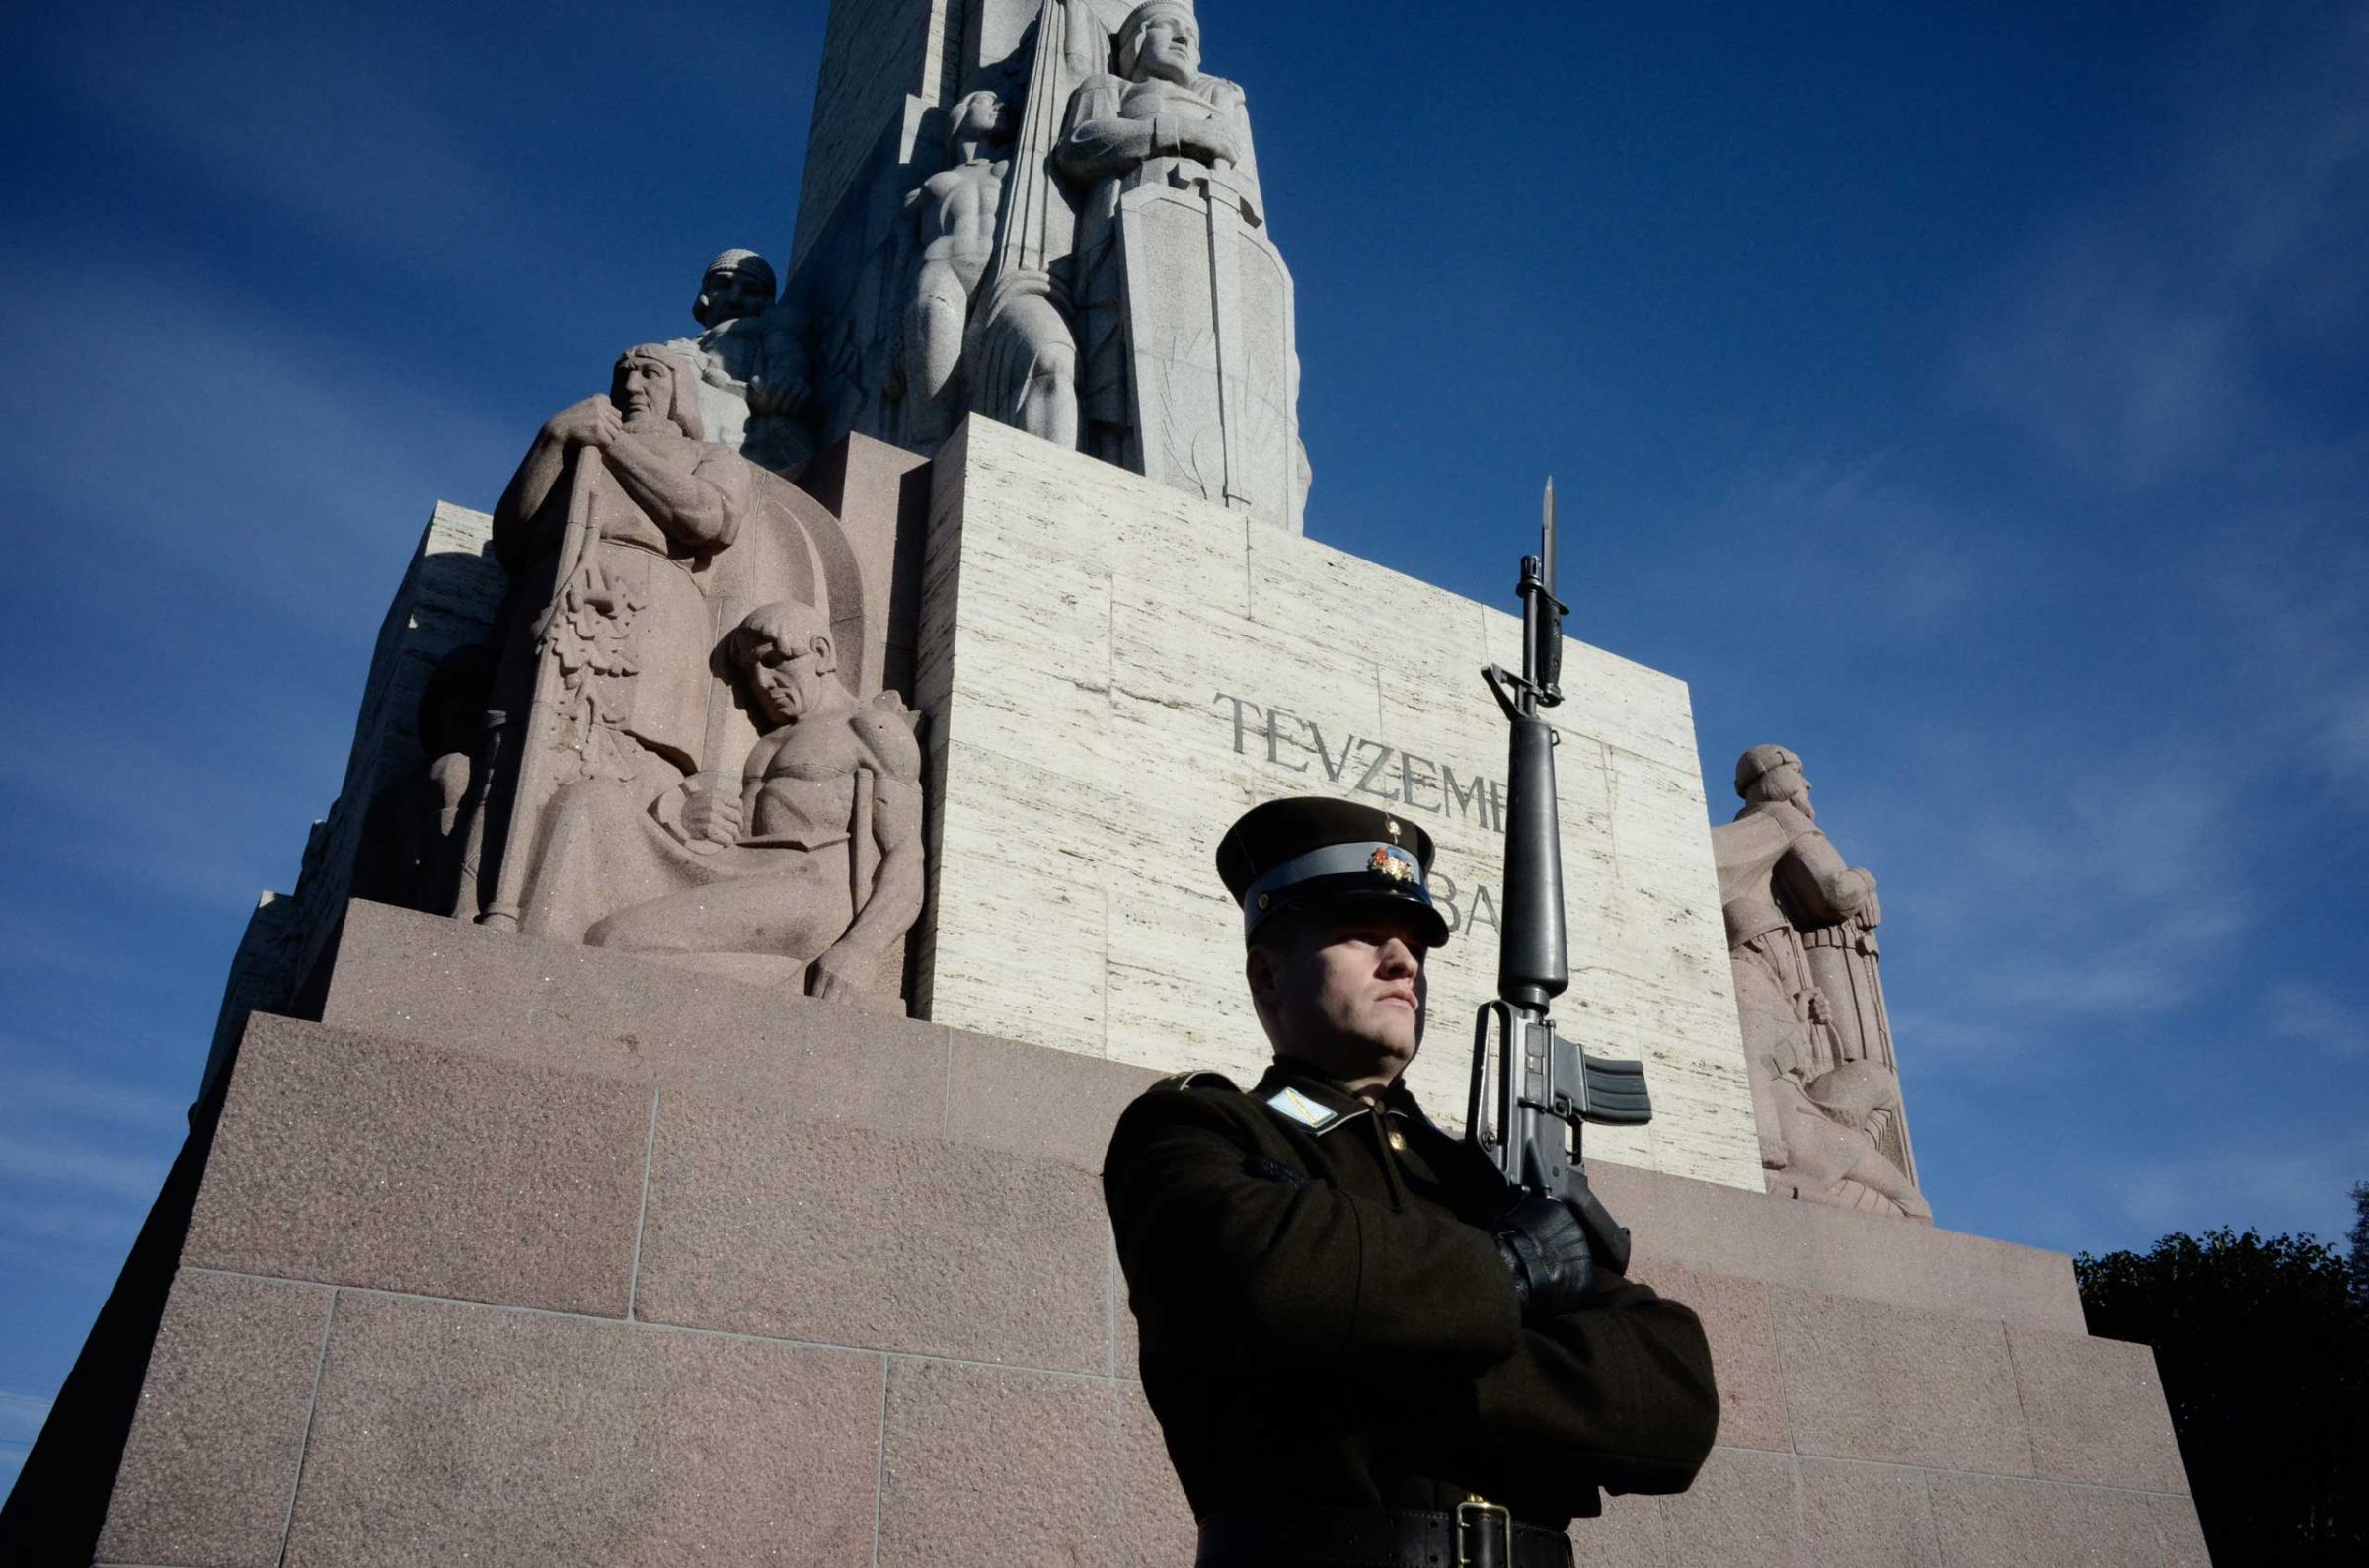 A guard stands at the Freedom monument in Riga, Latvia, a memorial to the soldiers killed during the Latvian war for independence. For many Latvians, it is a symbol of Latvia’ sovereignty and independence.